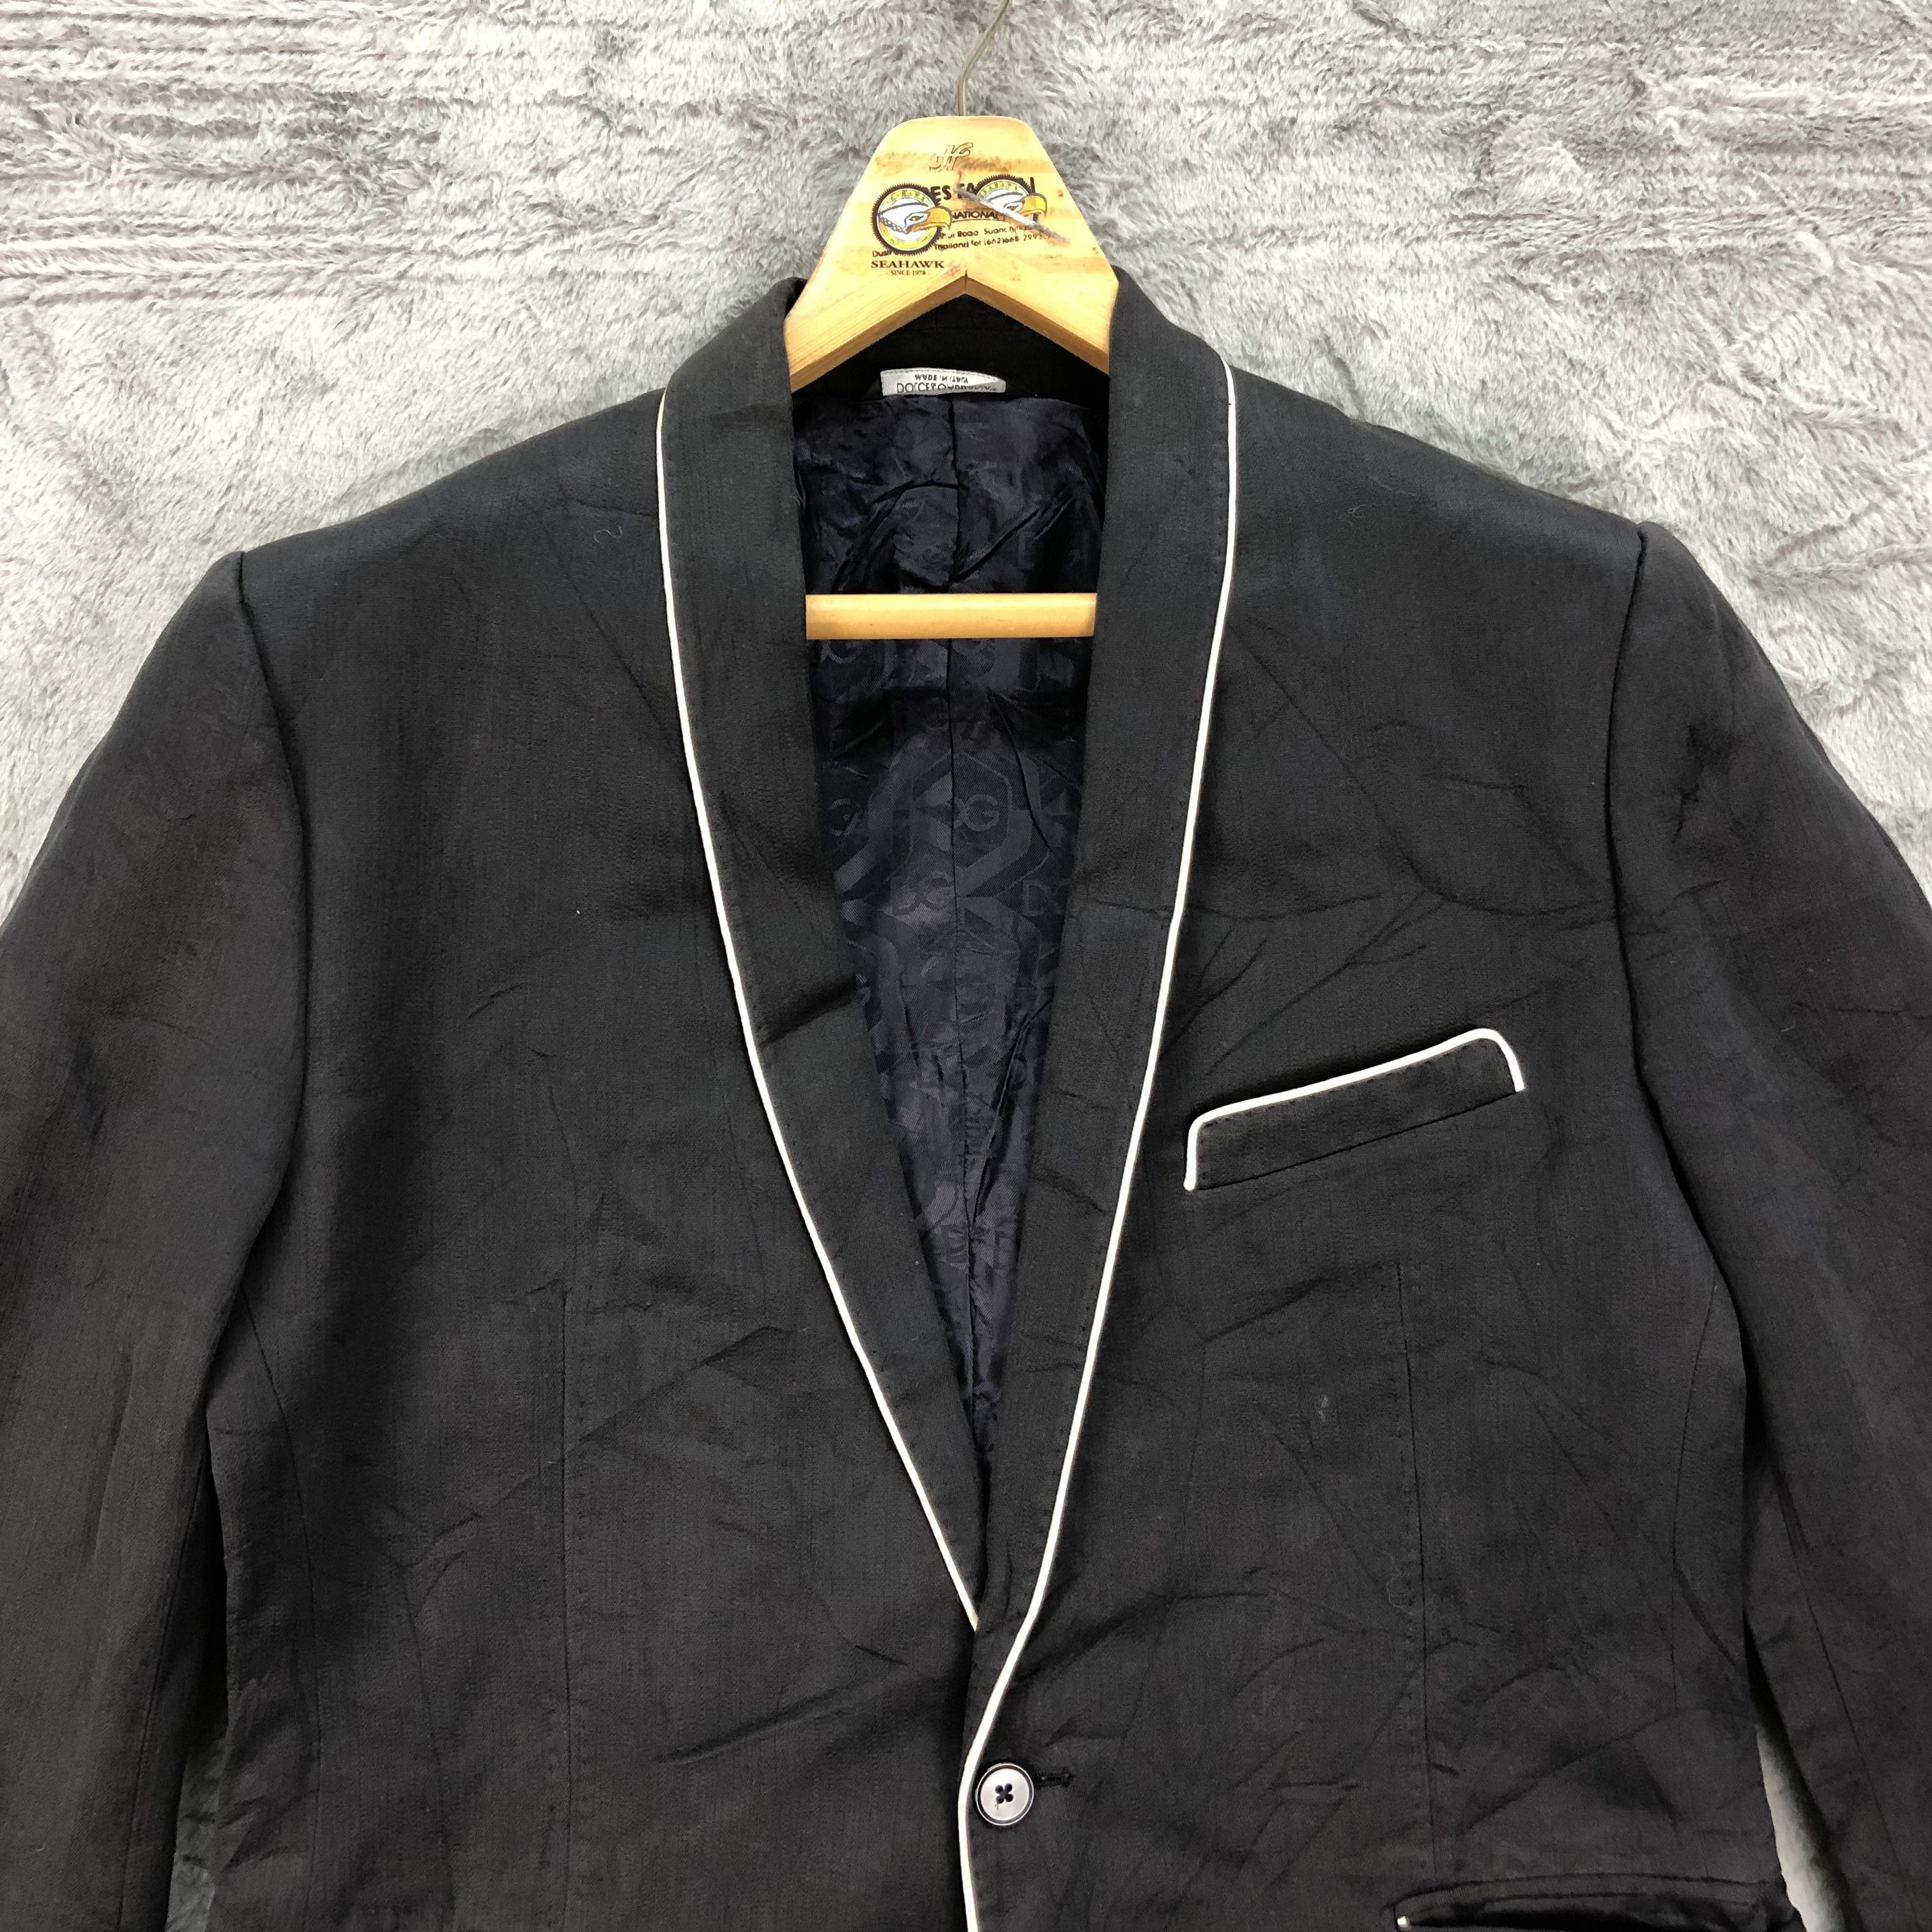 Dolce & Gabbana Made in Italy Suits Jacket #4565-159 - 2